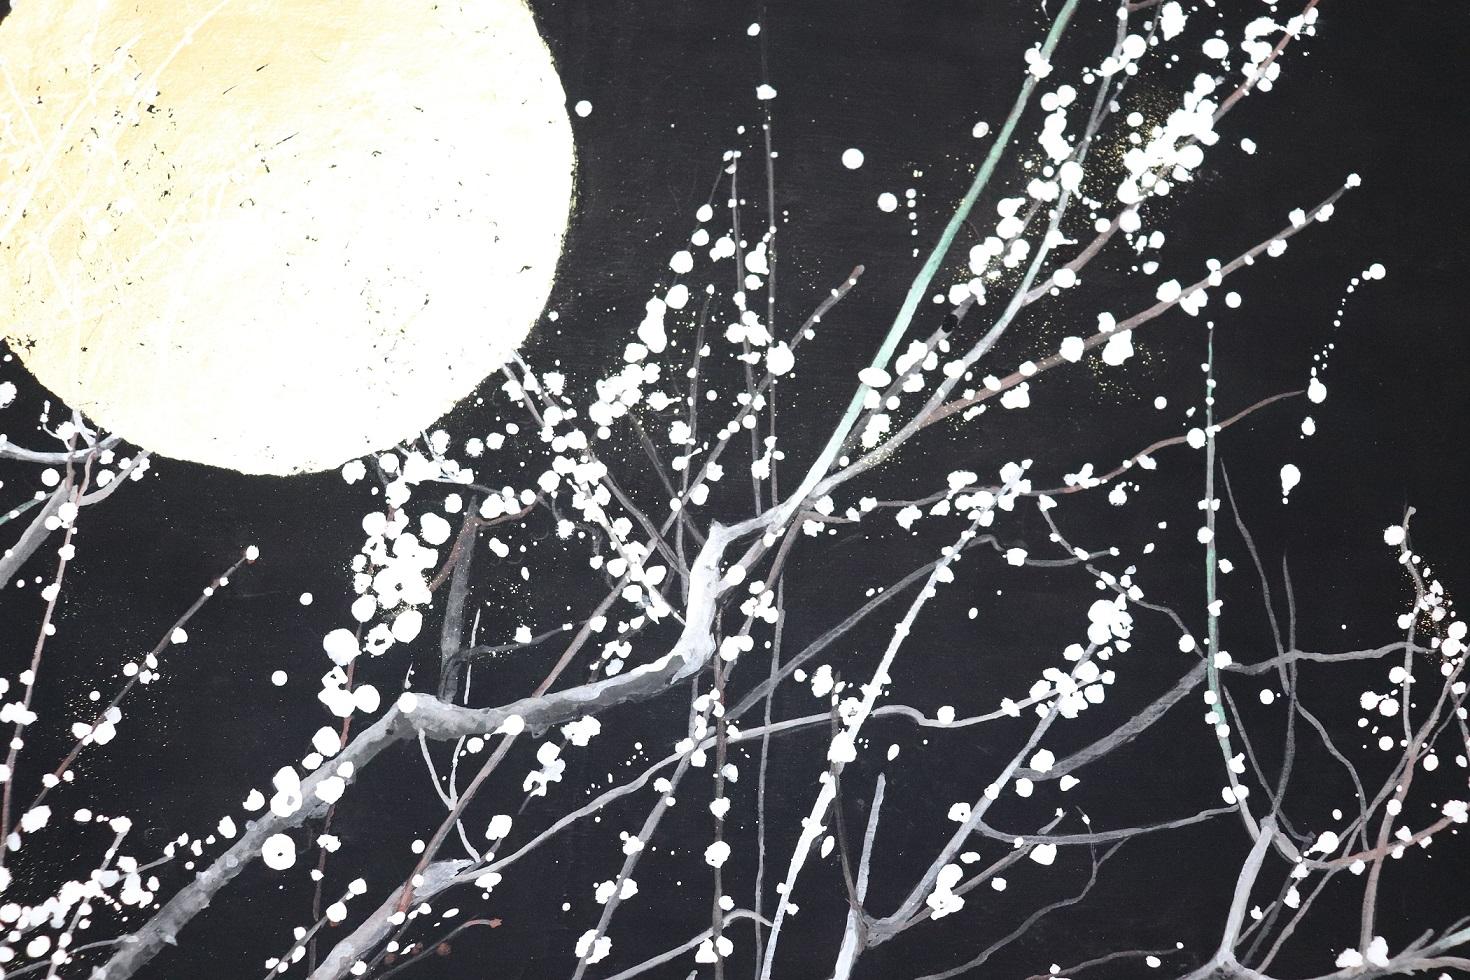 Nocturn IV by Lumi Mizutani - Japanese landscape painting, gold leaf, tree, moon For Sale 2